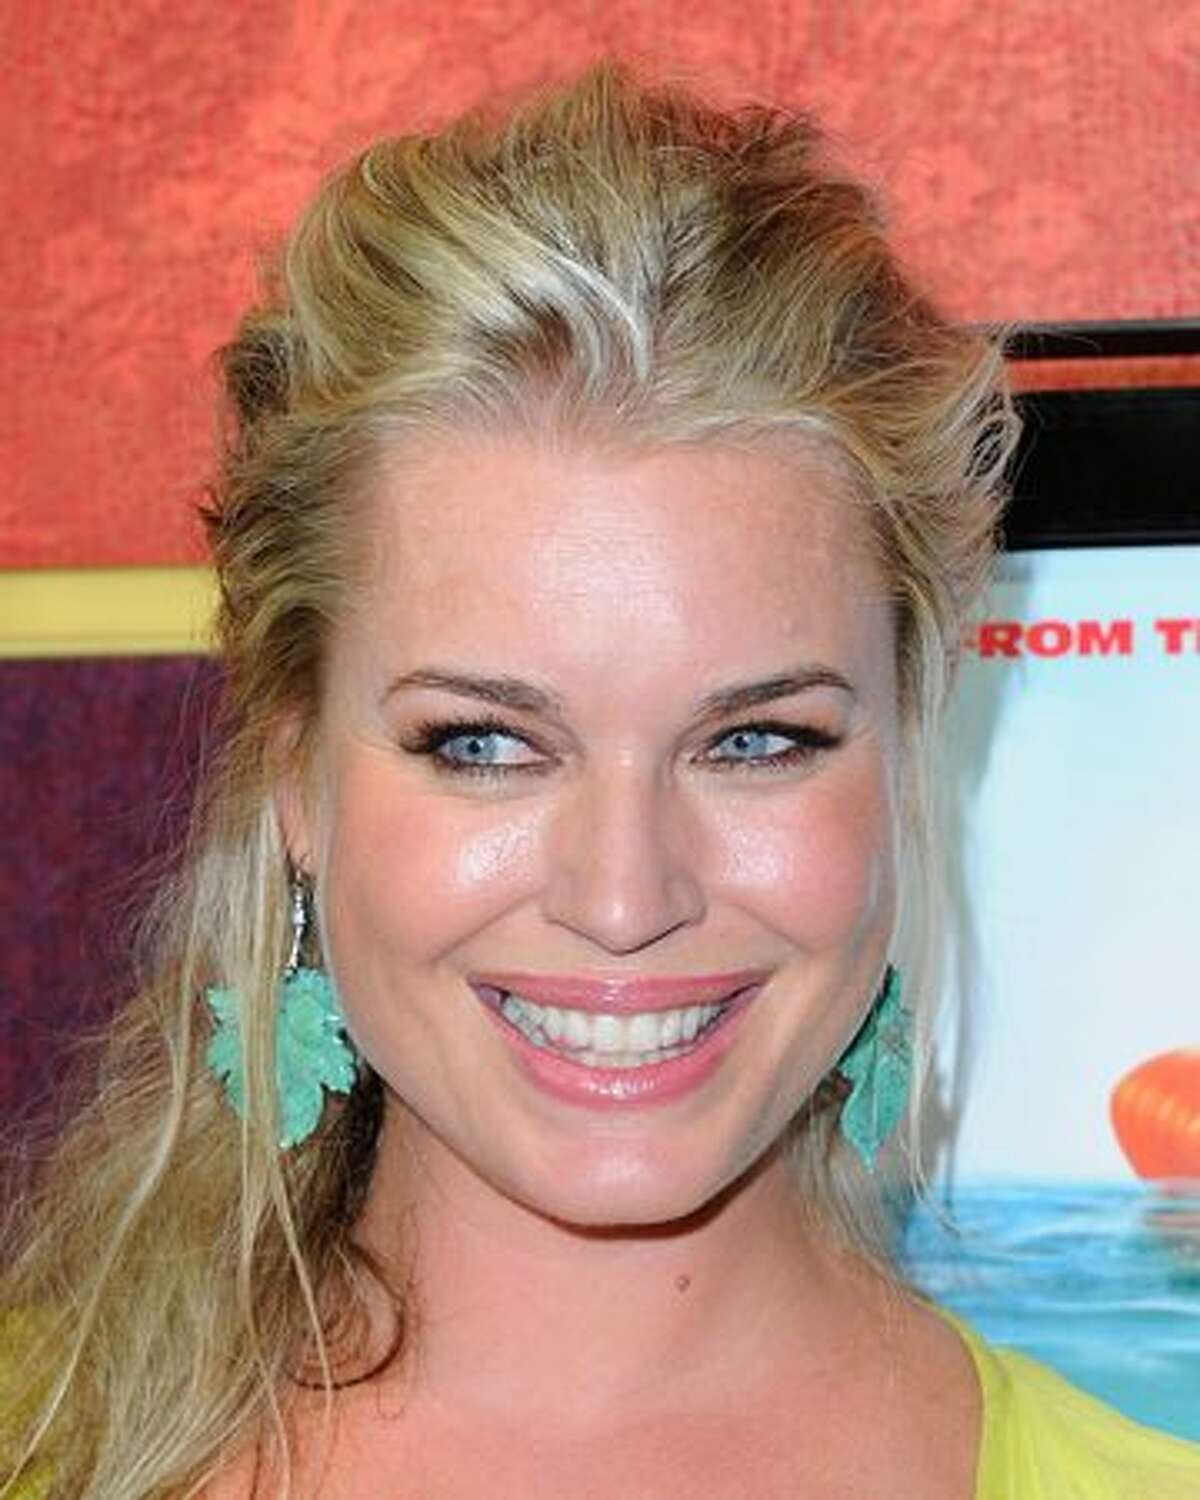 Actress Rebecca Romijn arrives at the premiere of The Weinstein Company's "Piranha 3D" at the Mann's Chinese 6 Theatre in Hollywood, California.